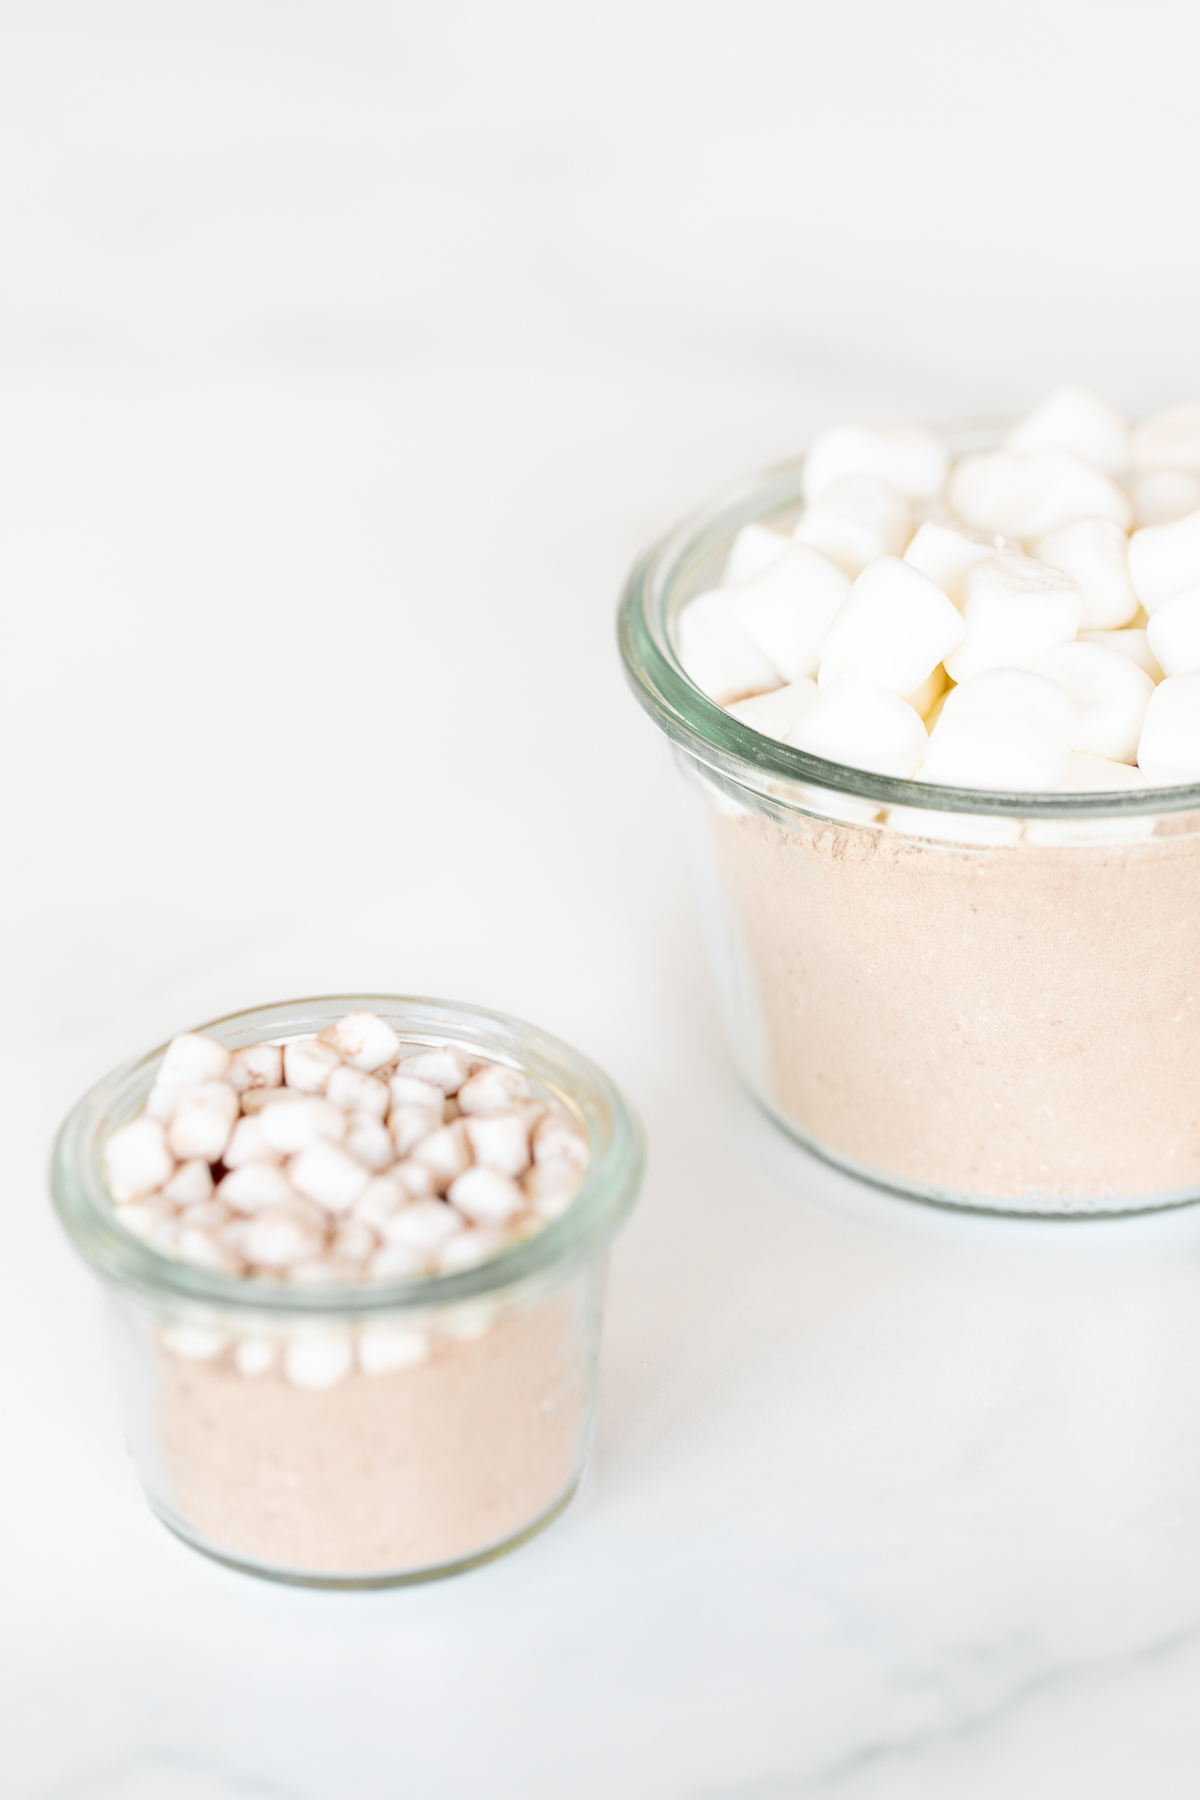 Homemade hot chocolate mix topped with marshmallows in a glass jar.